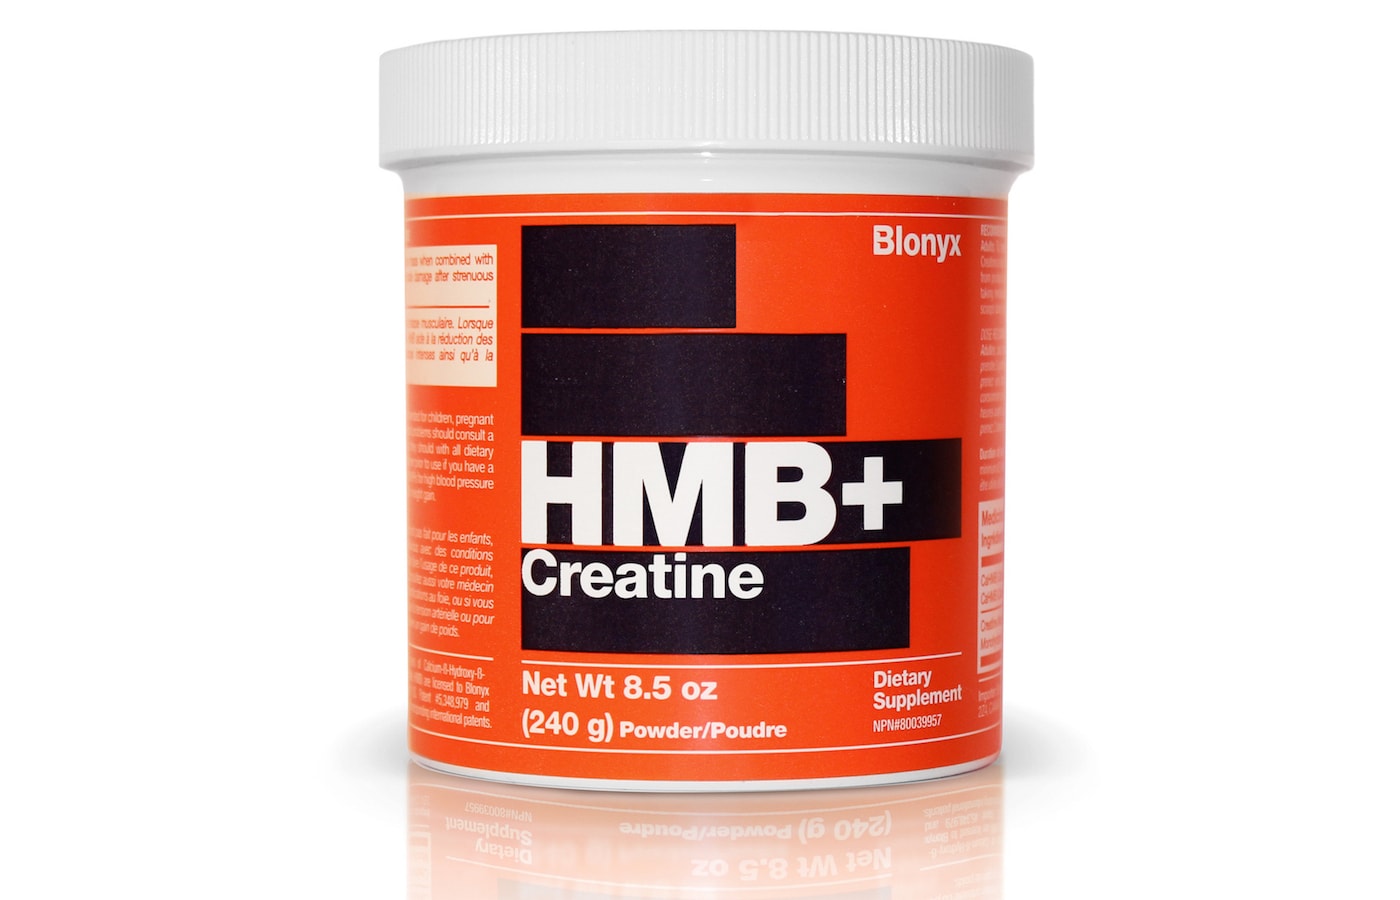 HMB in bodybuilding – action, dosage, effects